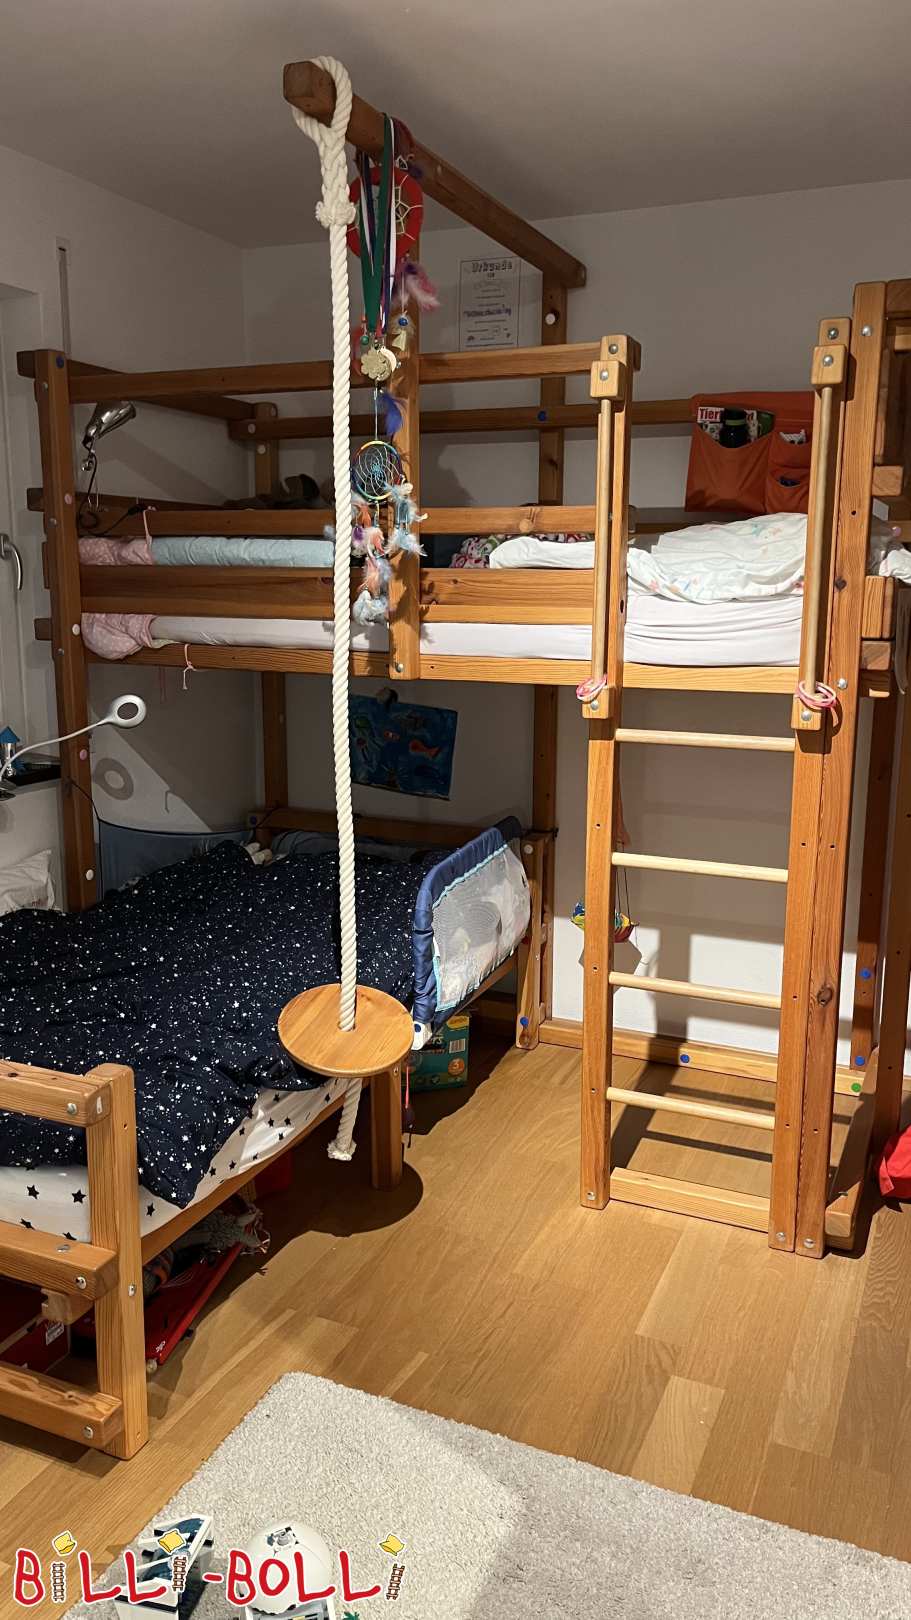 Bunk bed-side-offset, pine with slide tower and accessories (Category: Bunk Bed Laterally Staggered pre-owned)